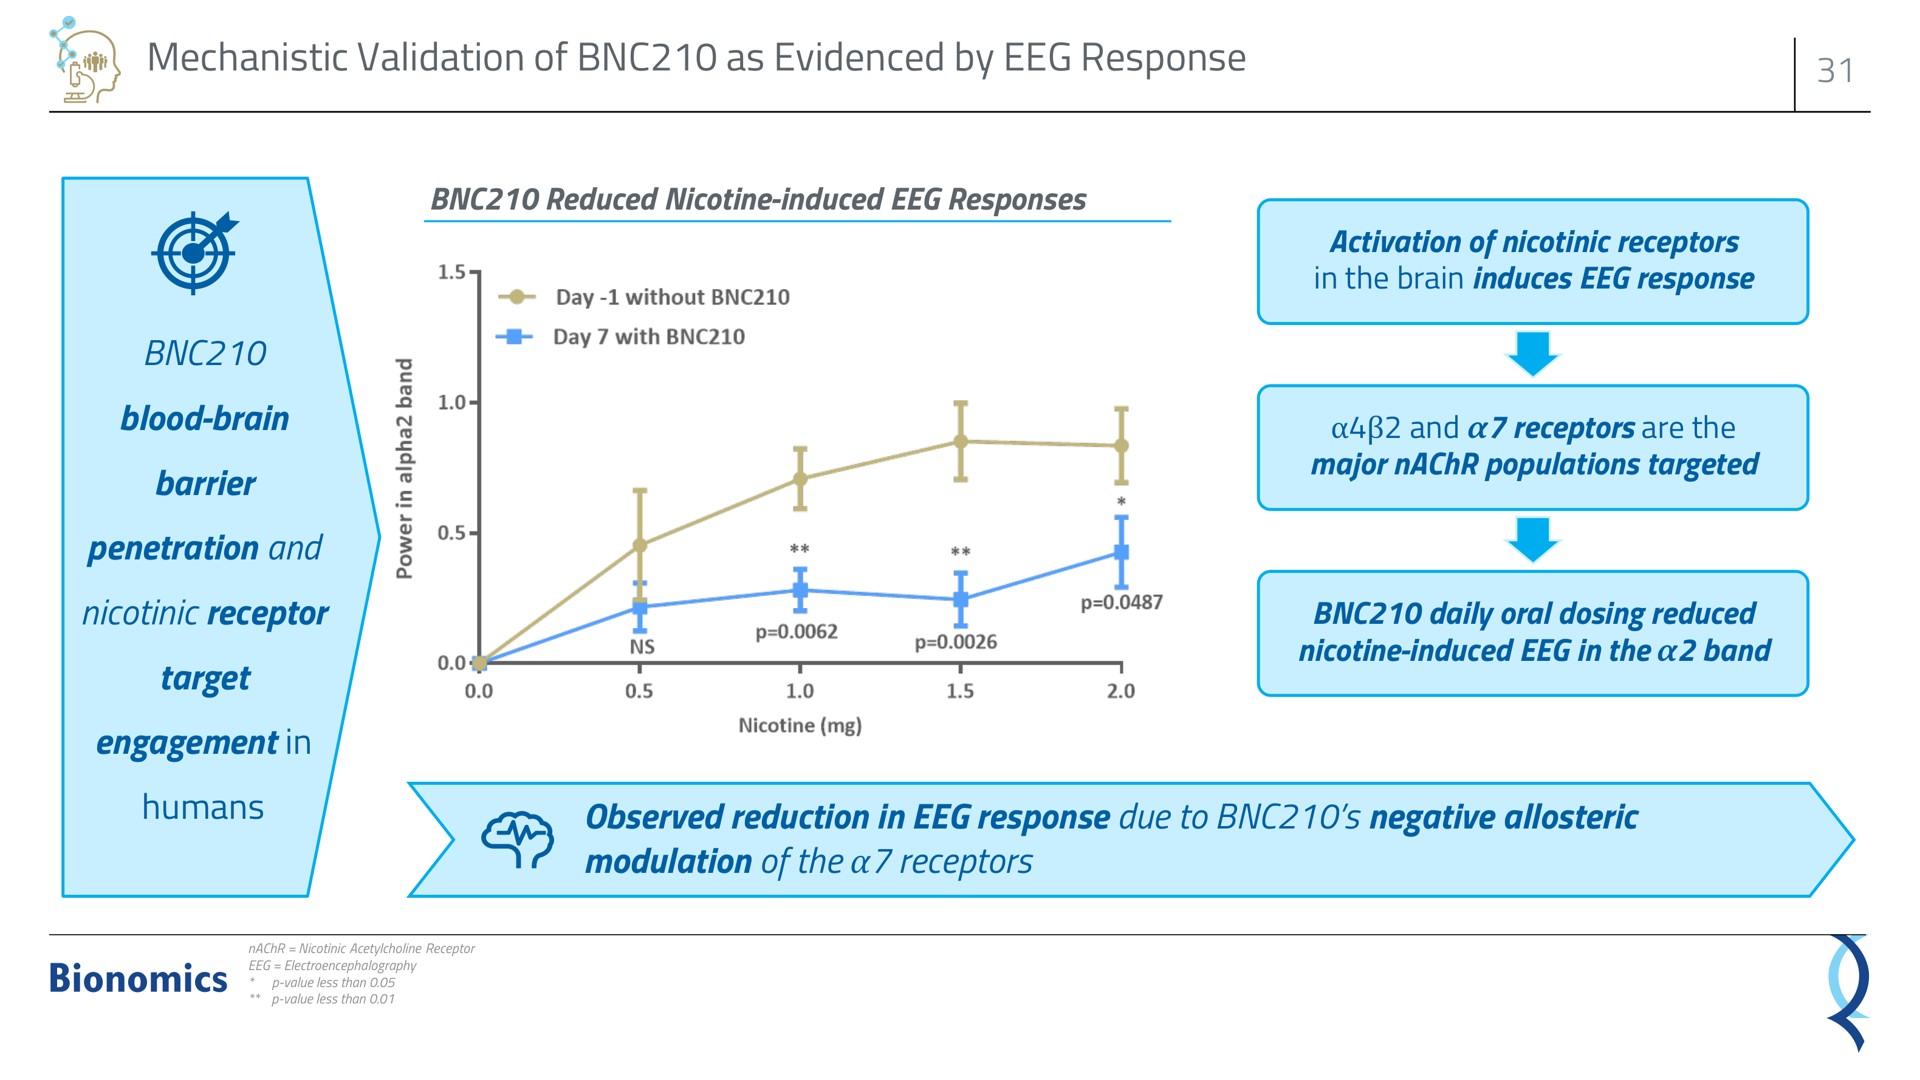 mechanistic validation of as evidenced by response observed reduction in response due to negative modulation of the receptors blood brain barrier penetration and nicotinic receptor target engagement in humans be | Bionomics